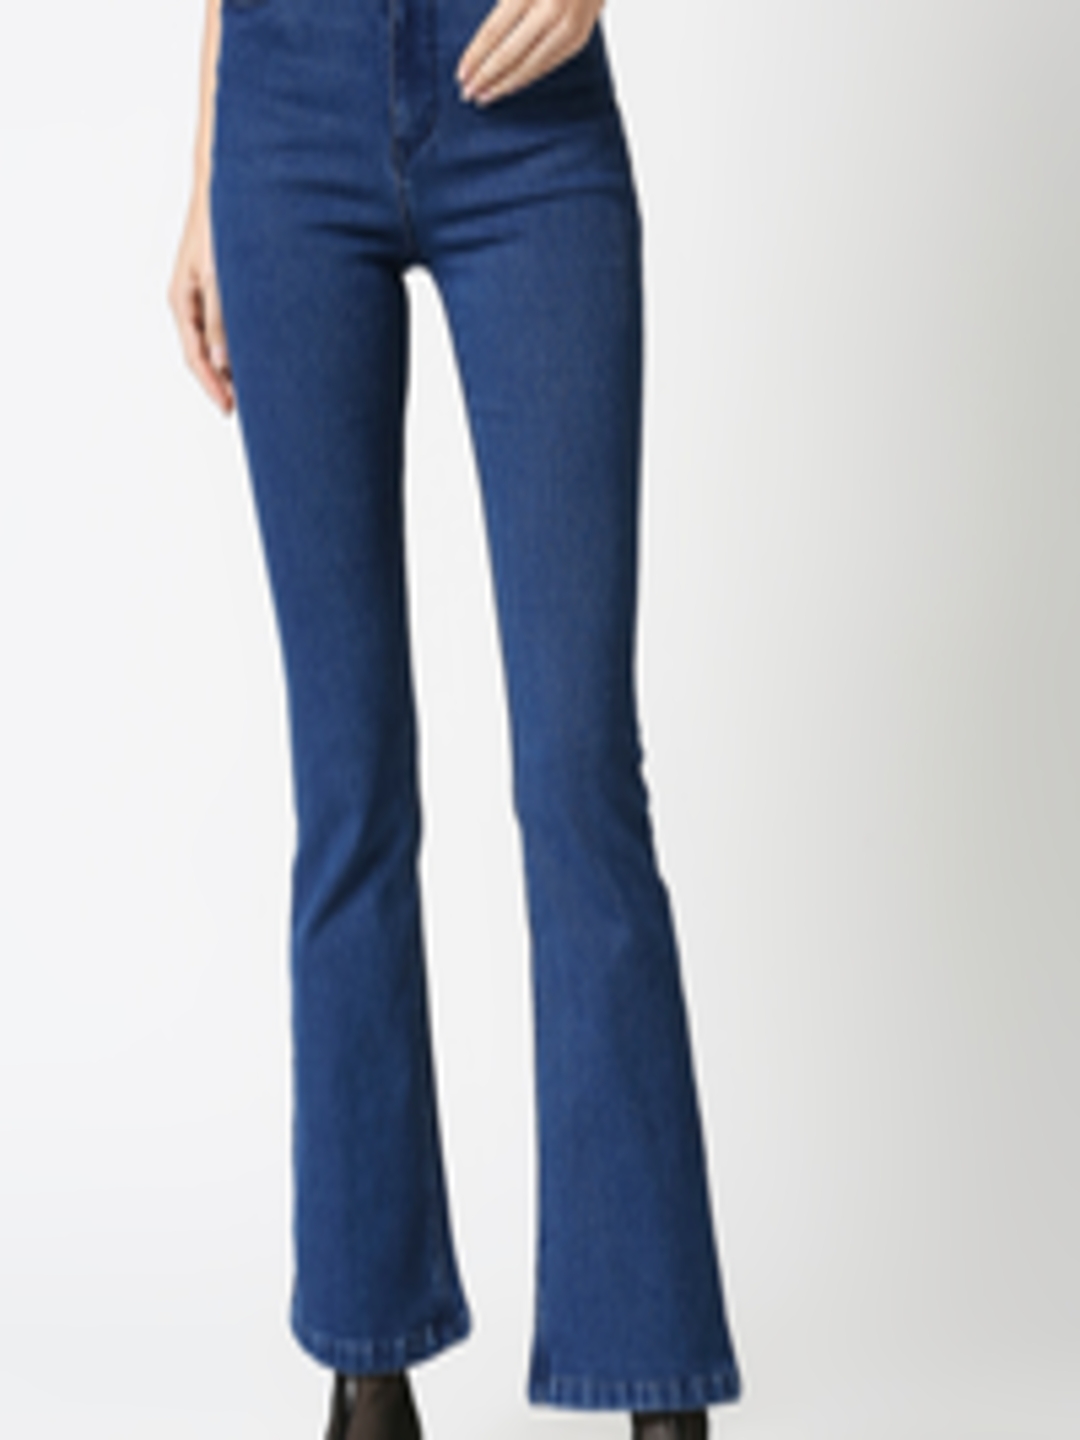 Buy High Star Women Blue Bootcut High Rise Jeans - Jeans for Women ...